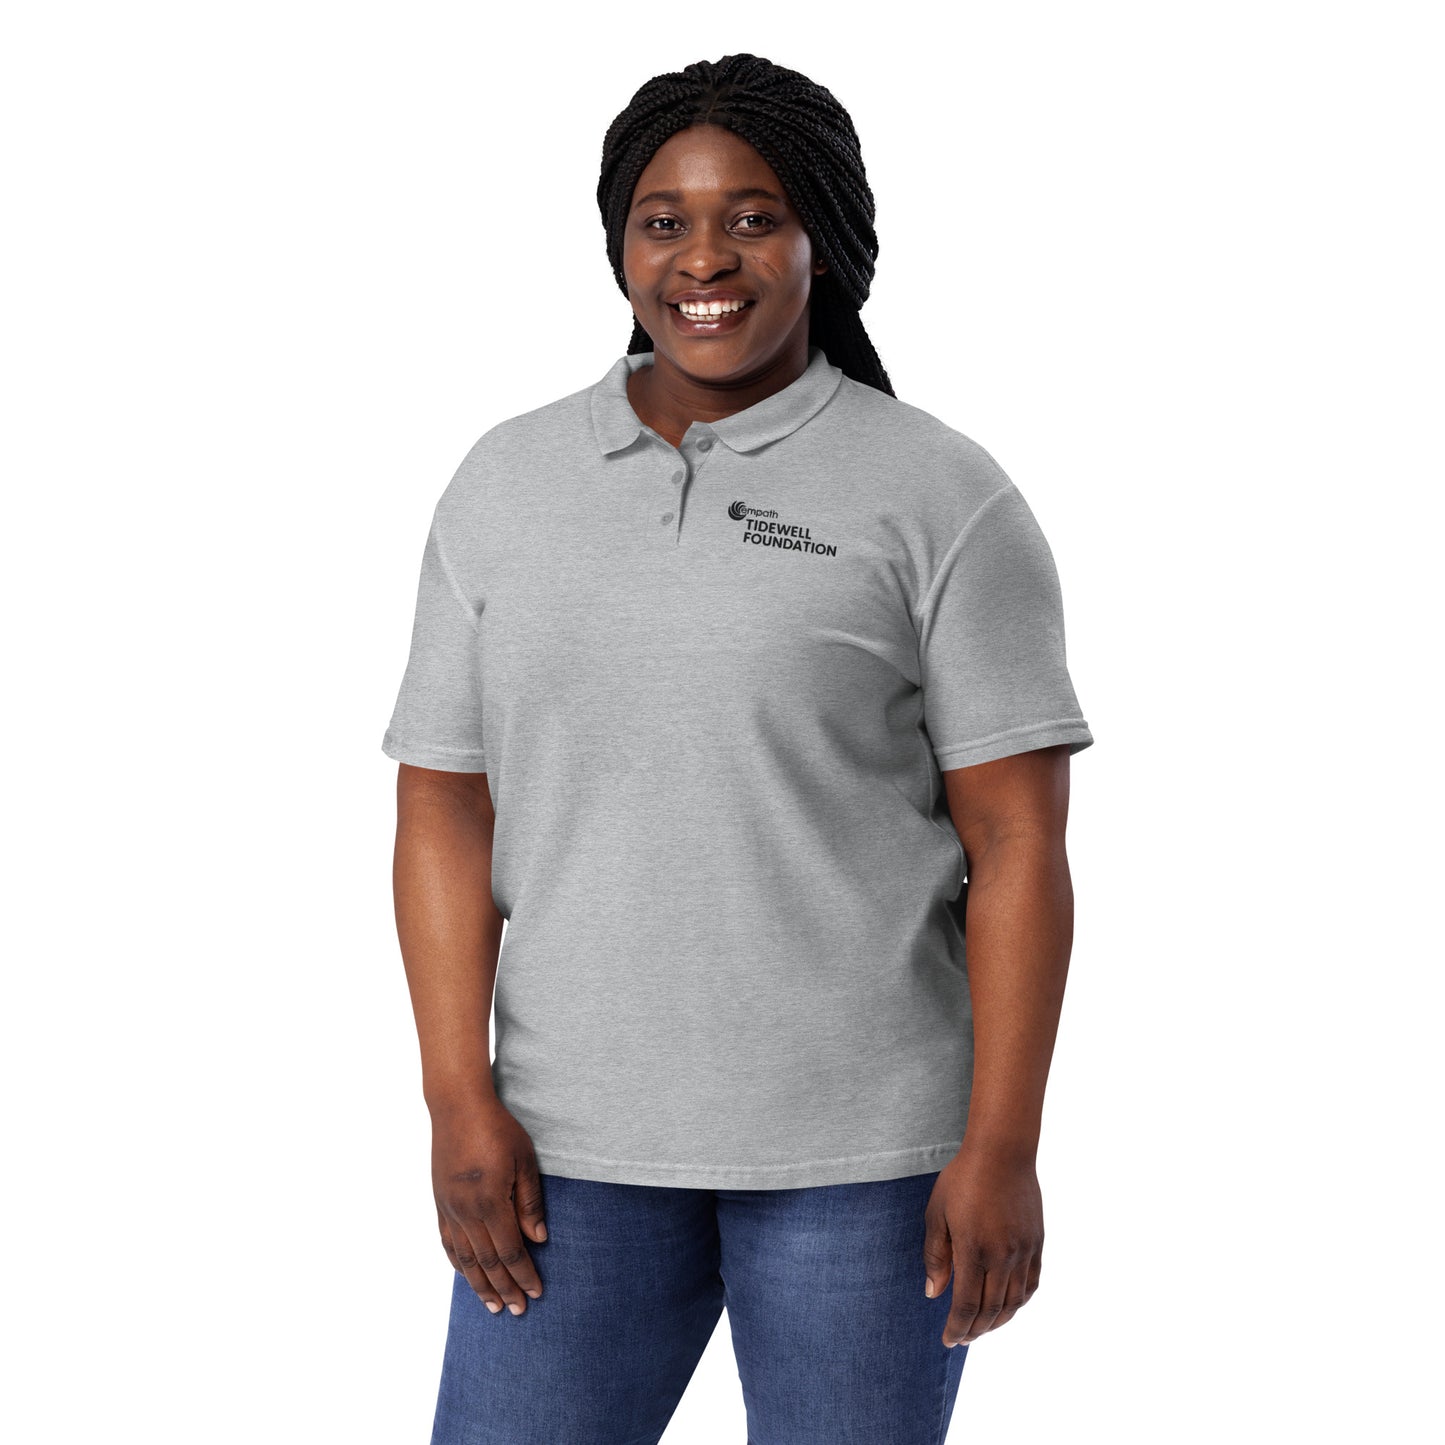 Classic Women's Polo - Tidewell Foundation